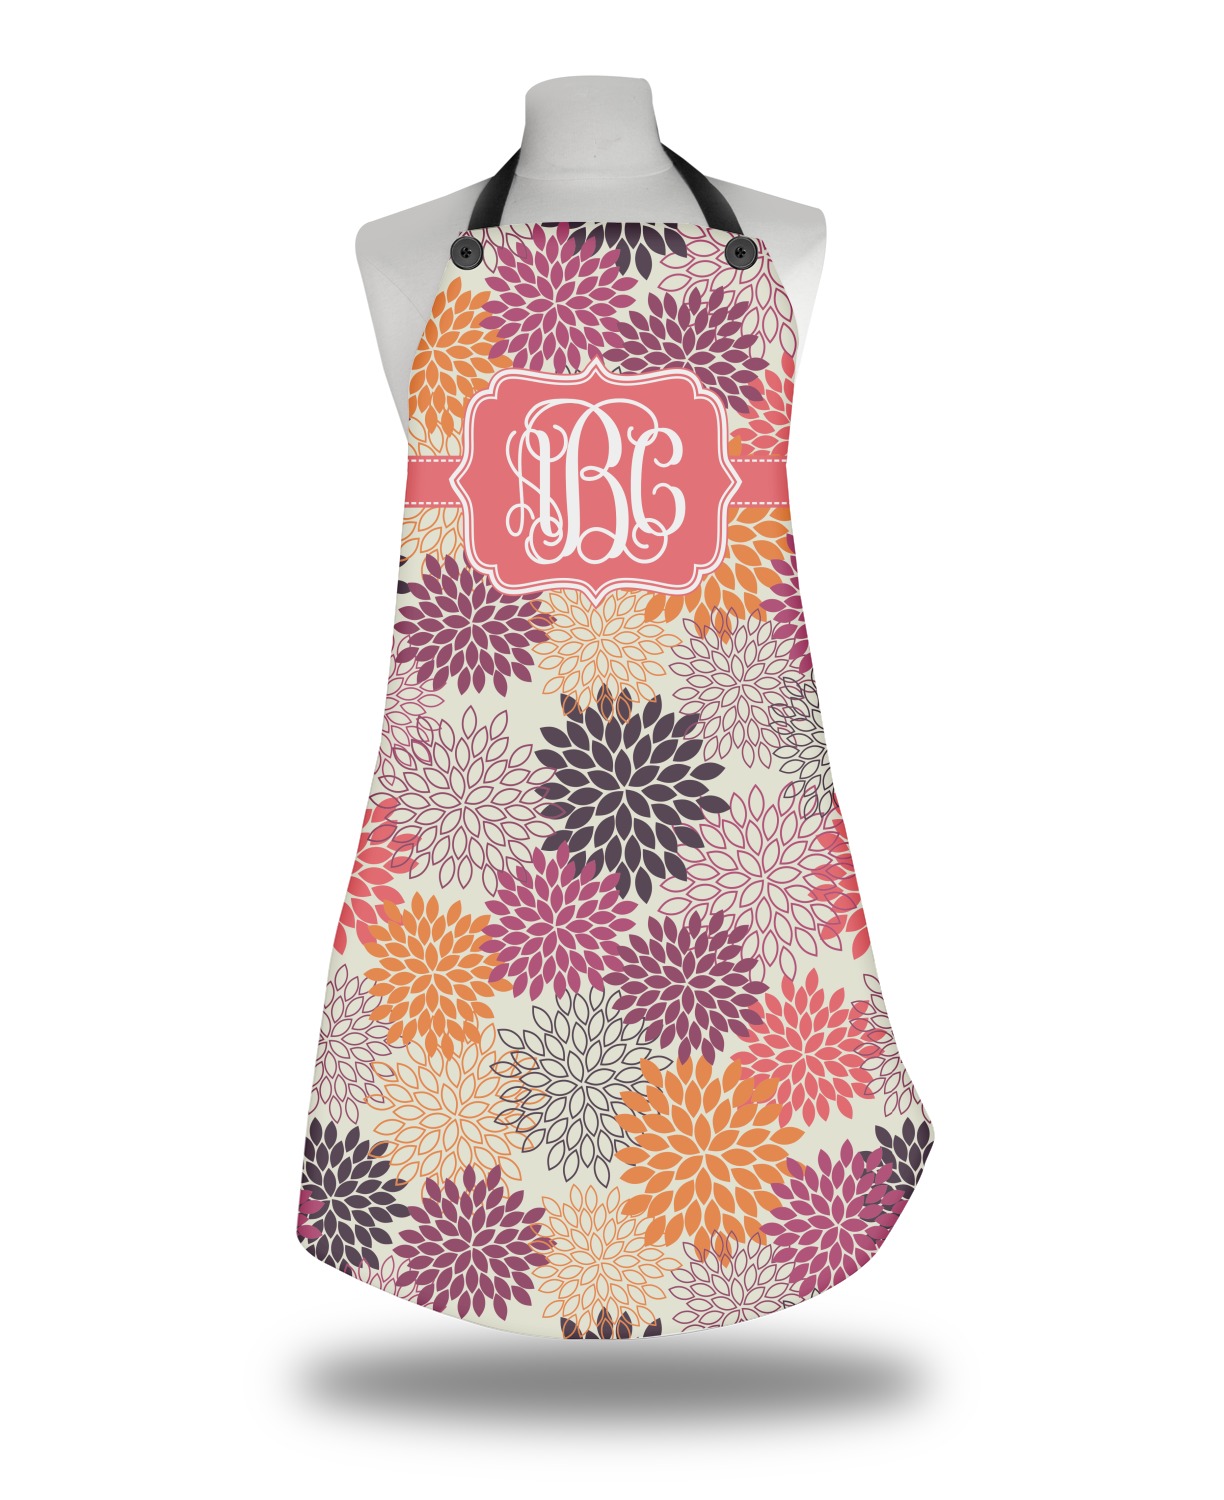 Mums Flower Apron (Personalized) - YouCustomizeIt